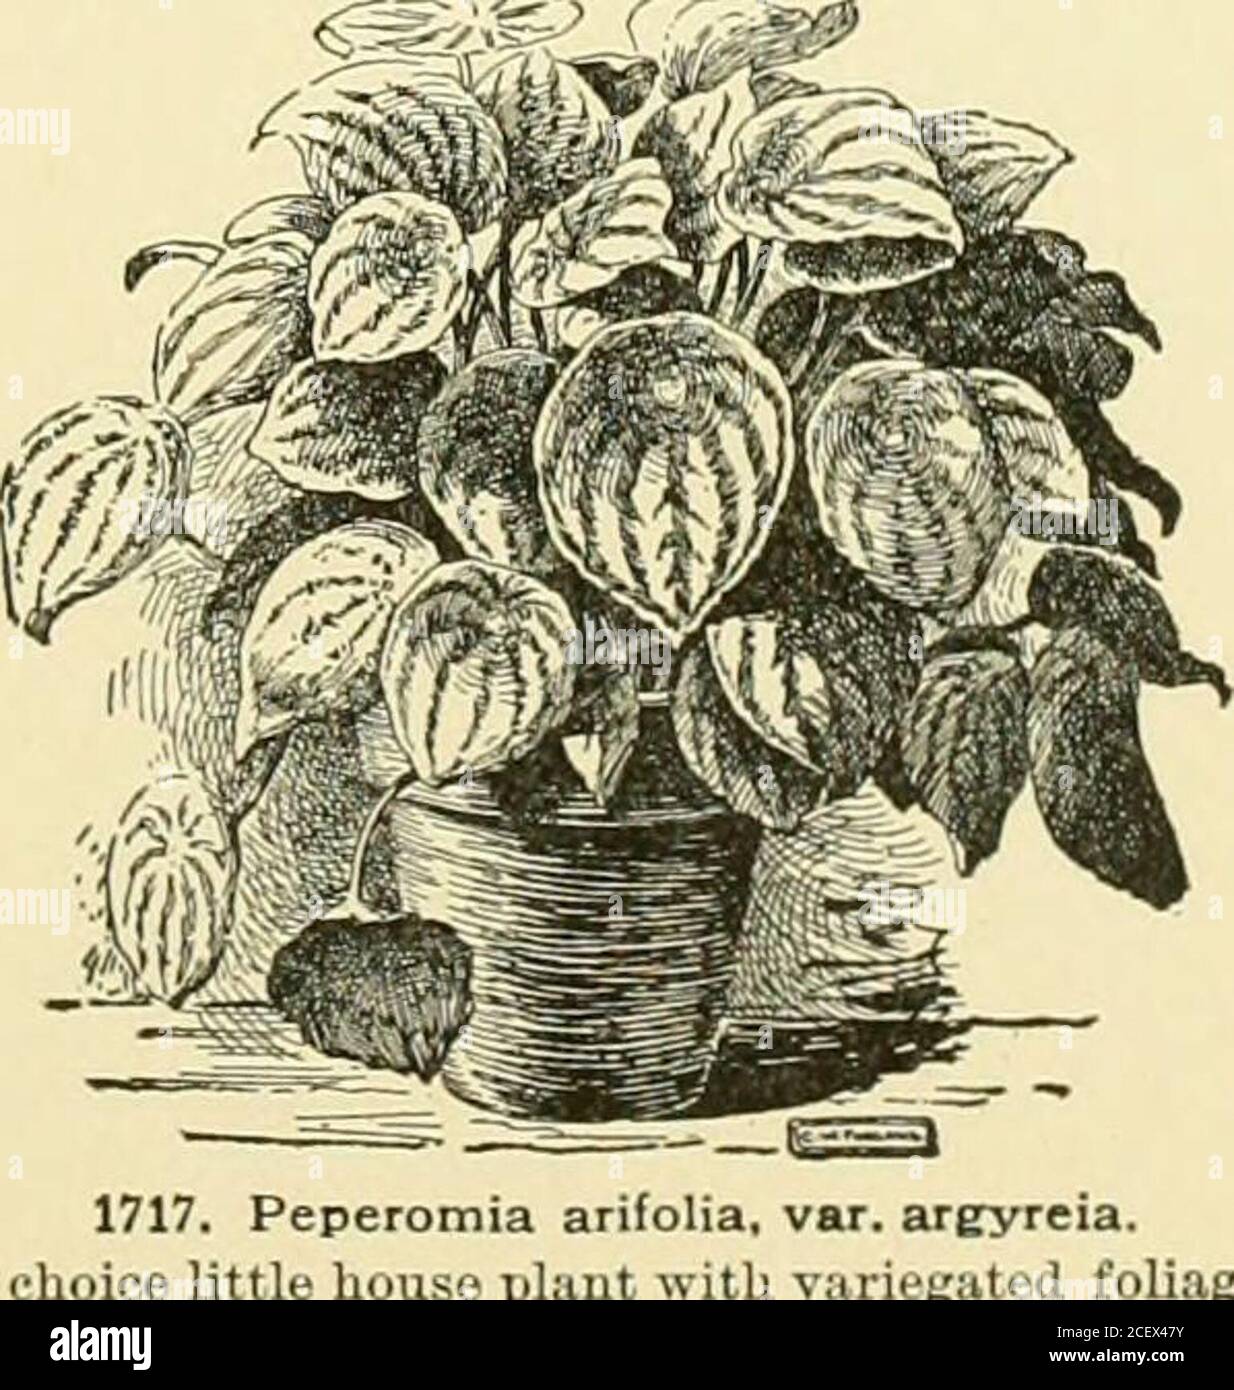 . Cyclopedia of American horticulture, comprising suggestions for cultivation of horticultural plants, descriptions of the species of fruits, vegetables, flowers and ornamental plants sold in the United States and Canada, together with geographical and biographical sketches, and a synopsis of the vegetable kingdom. earbelow: inflorescence loose and open, the peduncles usu-ally 1- or 2-fld.: fls. about 1 in. long, pink or rose-pur-ple, very slender at the base but full or inflated above,the lips well marked. Calif. B.R. 22:1899. B.M. 3853.R.H. 1875:110; 1896, p. 348. l. H. B. PEONY. See Paionia Stock Photo